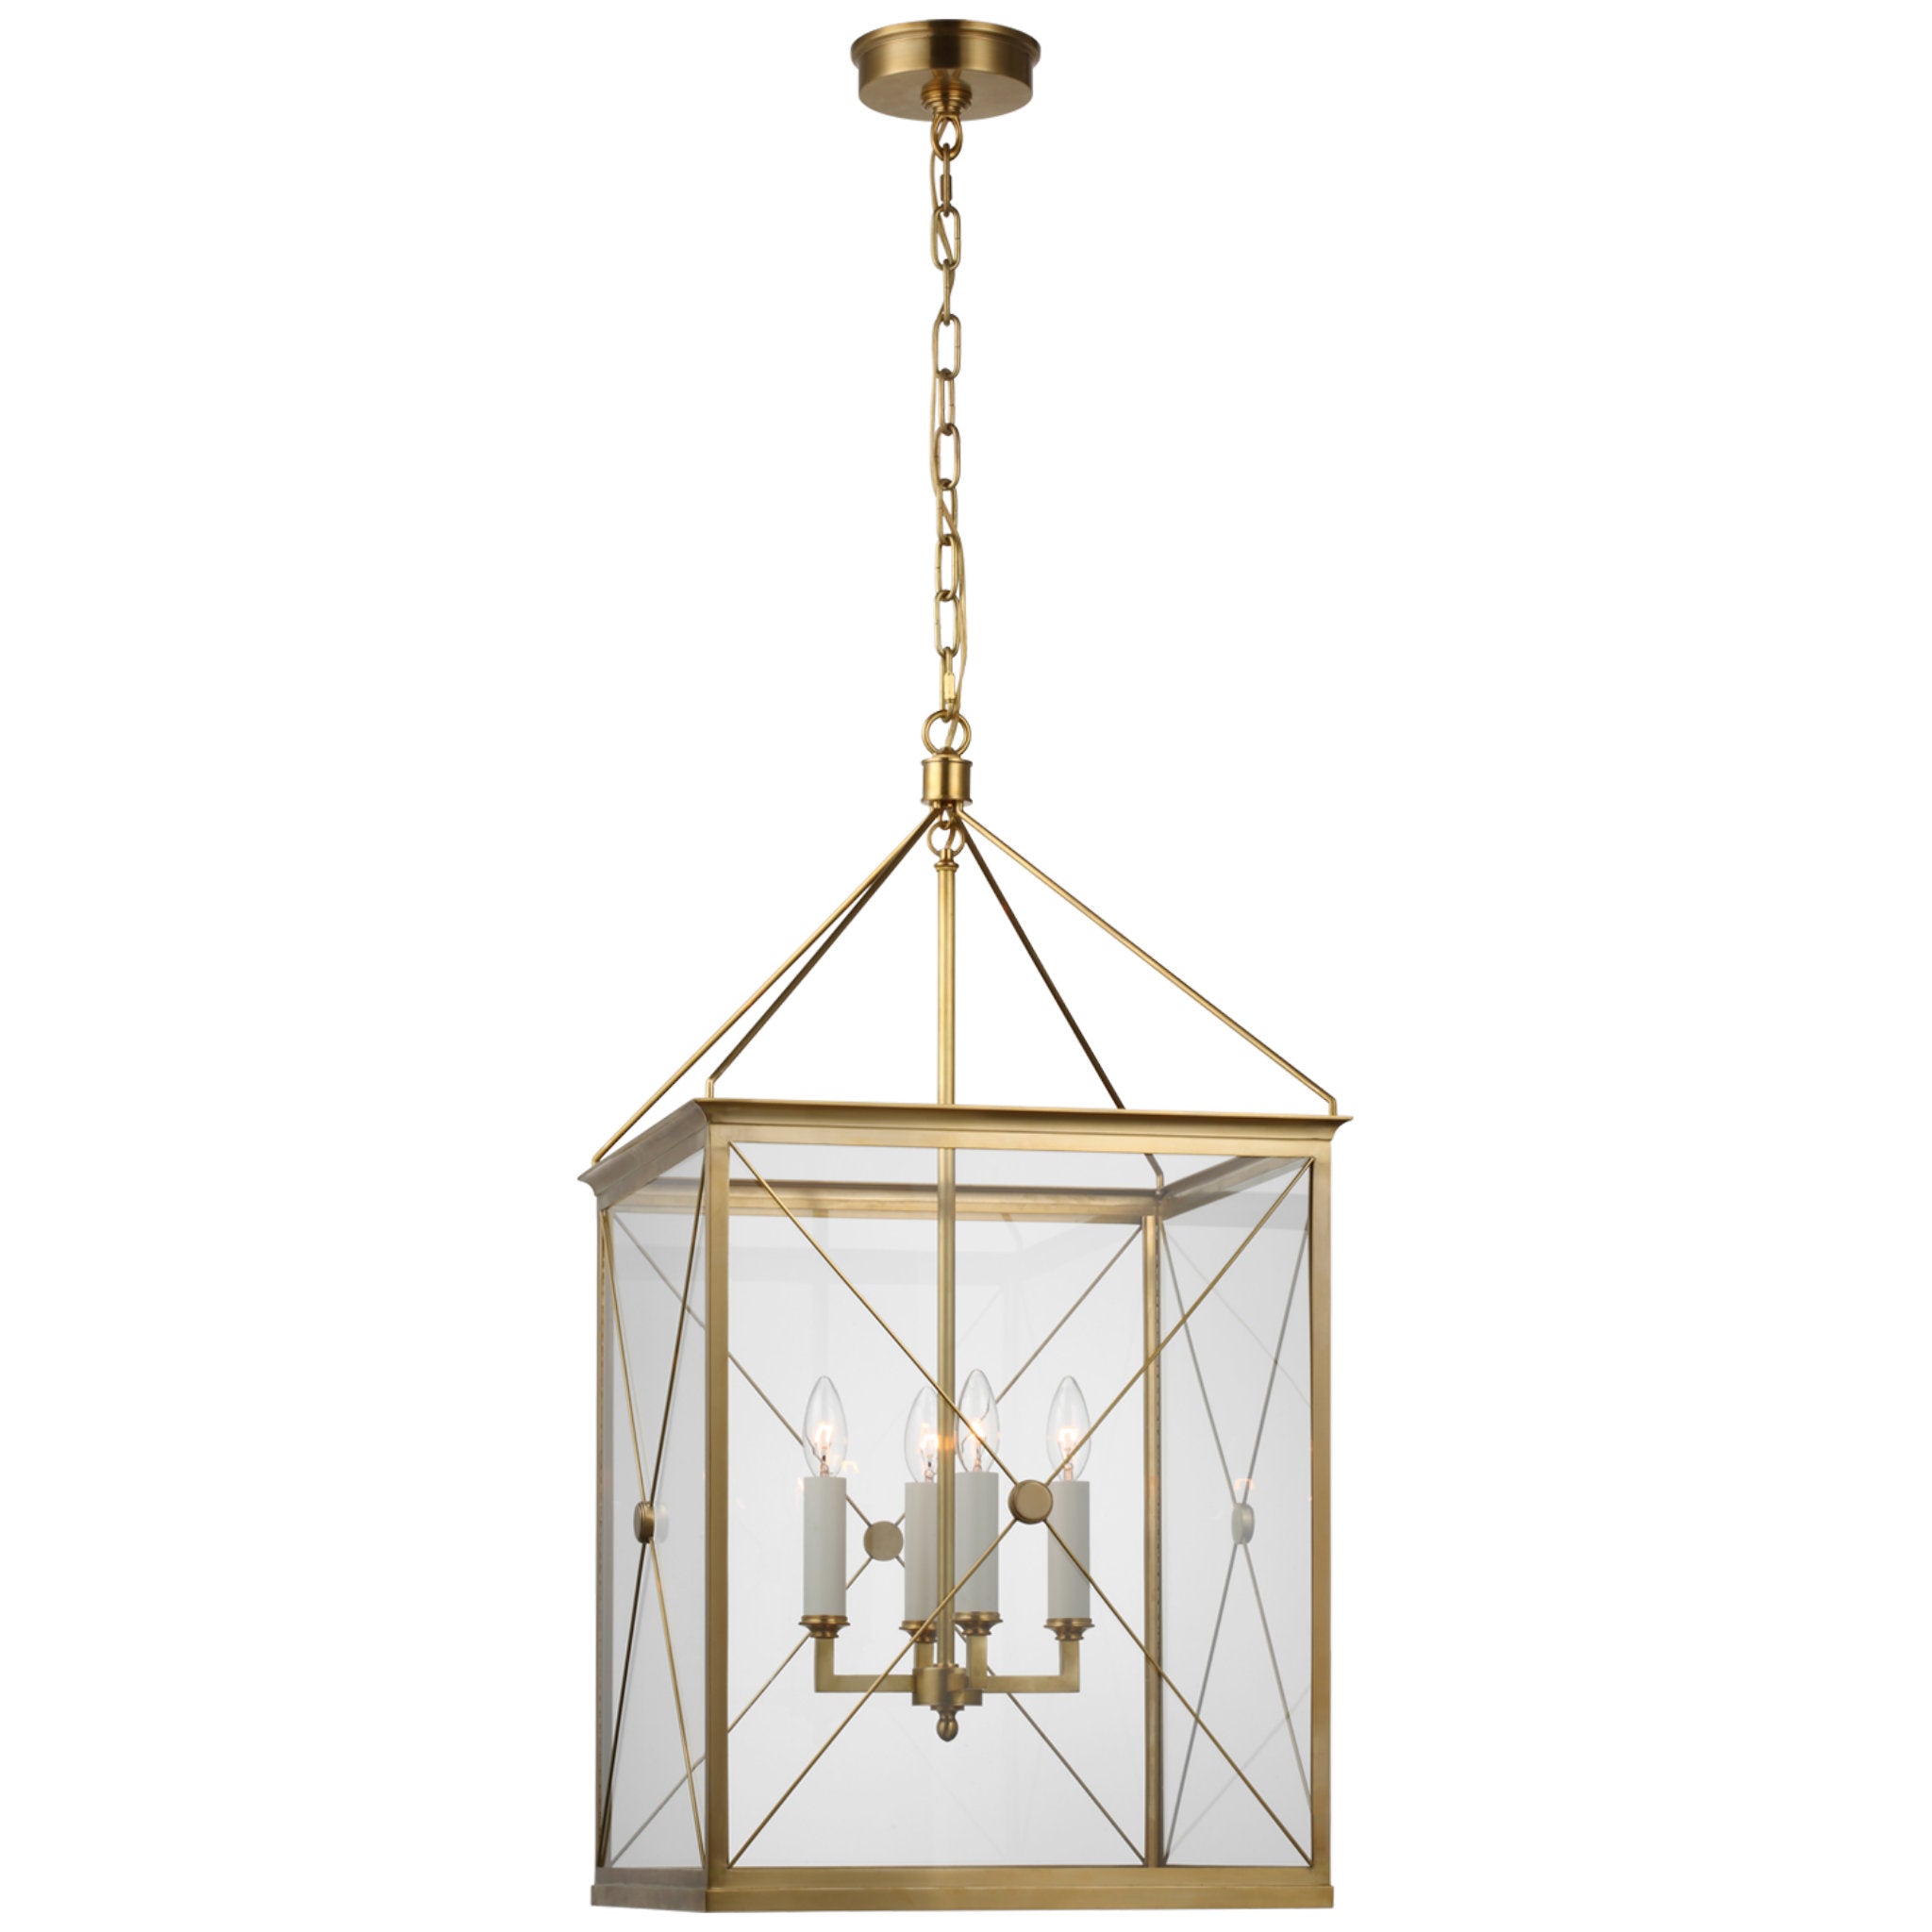 Julie Neill Rossi Medium Lantern in Antique-Burnished Brass with Clear Glass